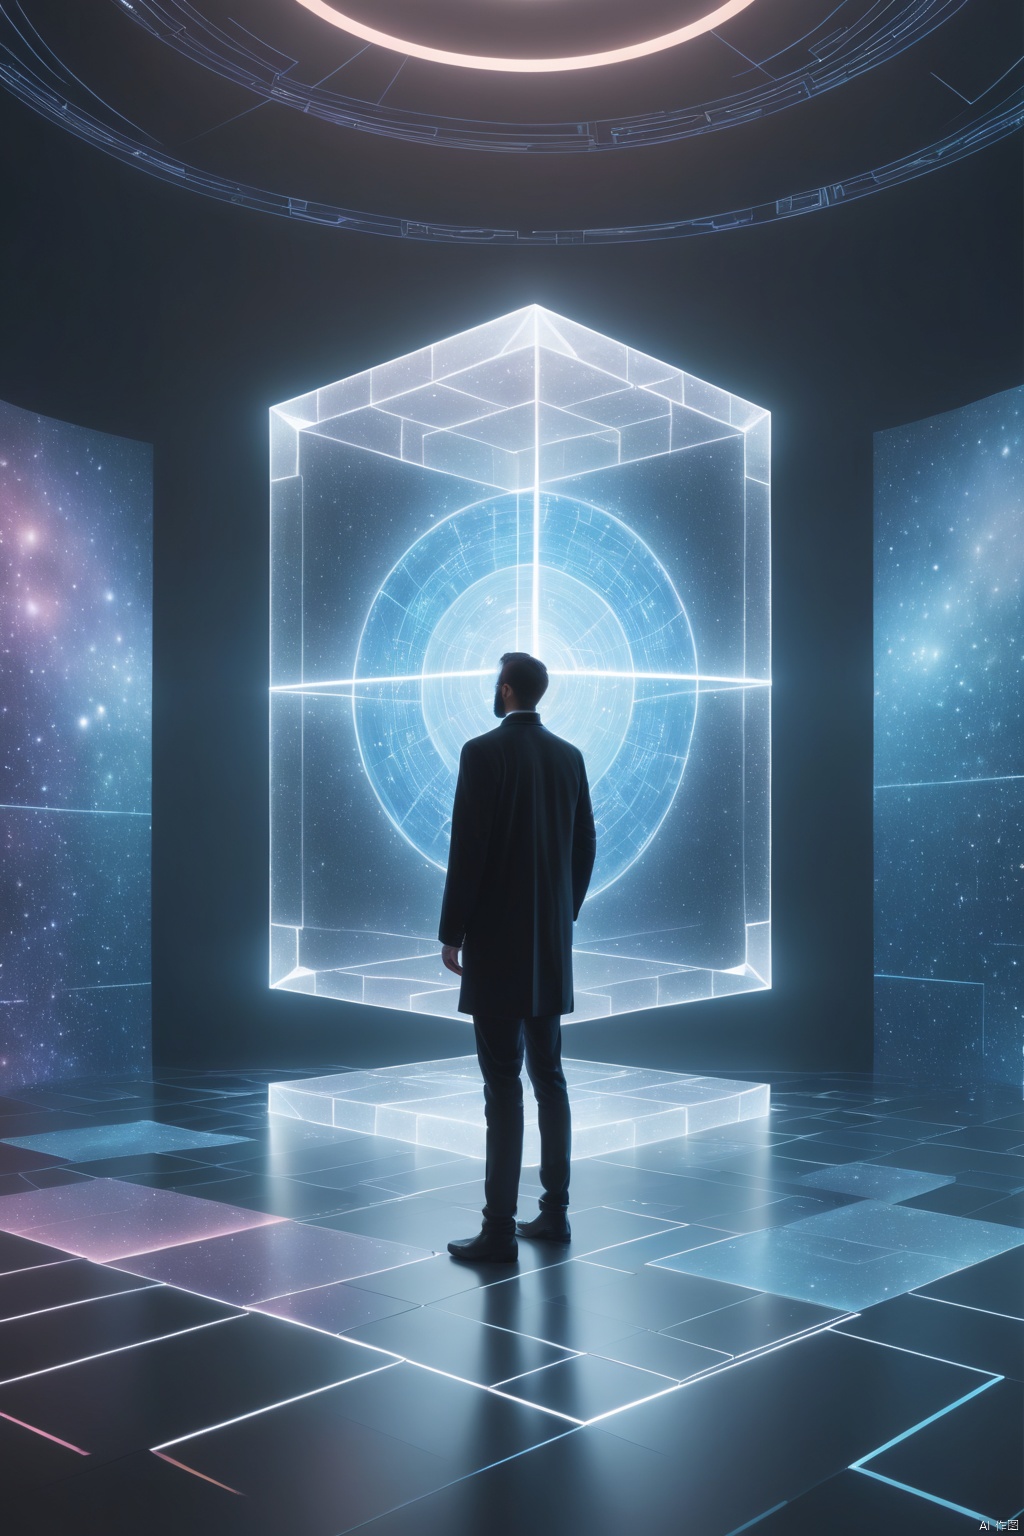  Image of Arafad of a man standing in front of a cube wall, deeper into the metaverse we go, Lit. 'the cube', cube portals, surreal cyberspace, retrofuturist liminal space, matte painting of human mind, projection mapping, holographic projections, the encrypted metaverse, data holograms, a crystalline room